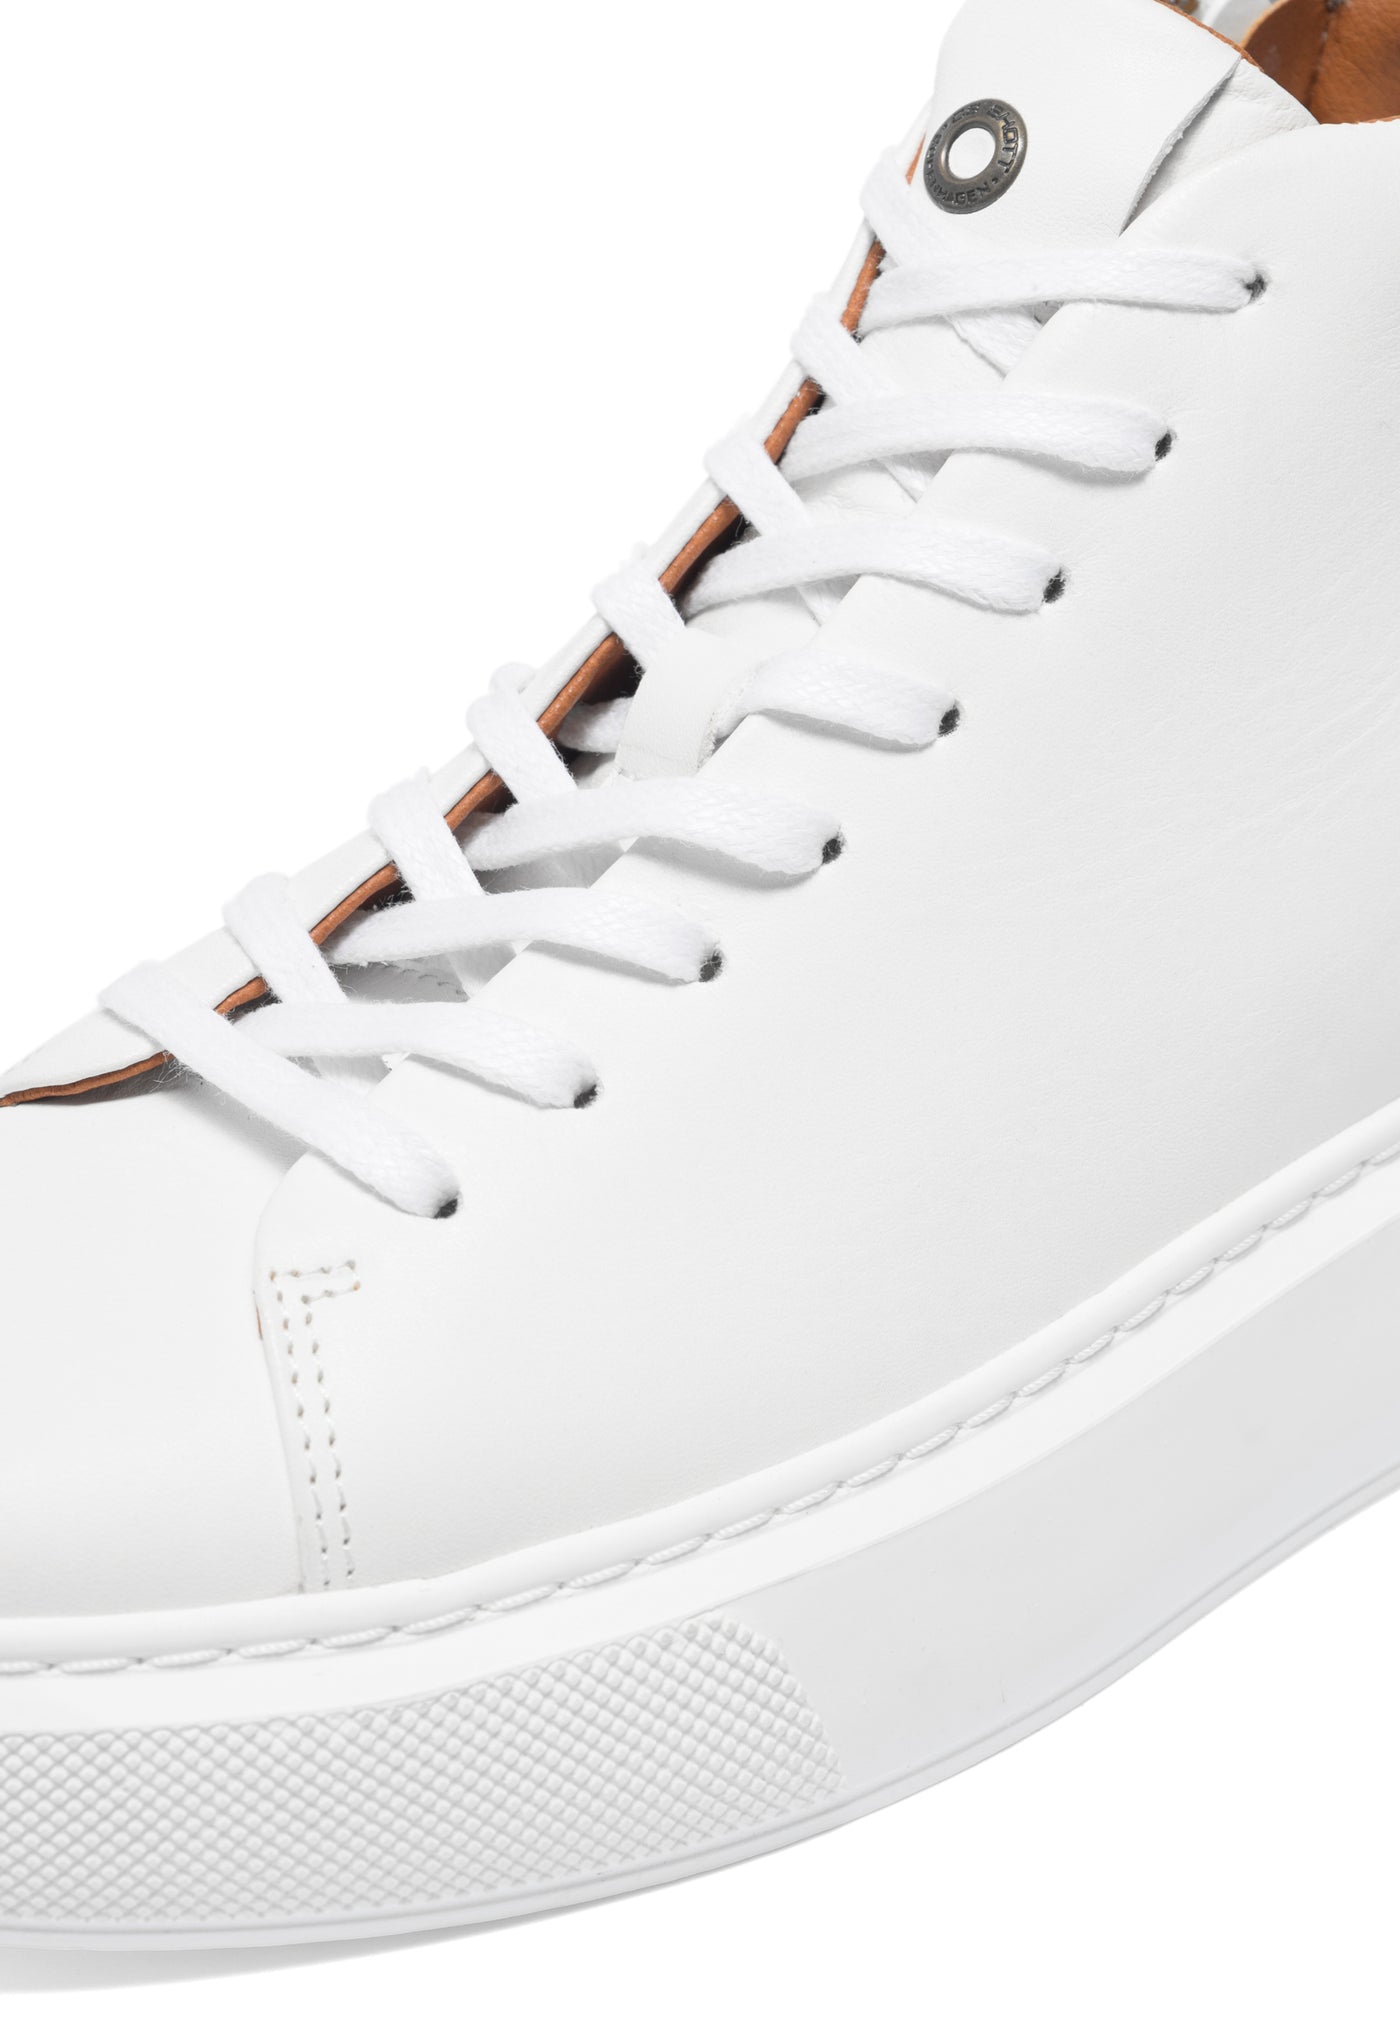 CASHOTT CASIDA Lace Boot Leather Vegetable Tanned Mid Sneakers White